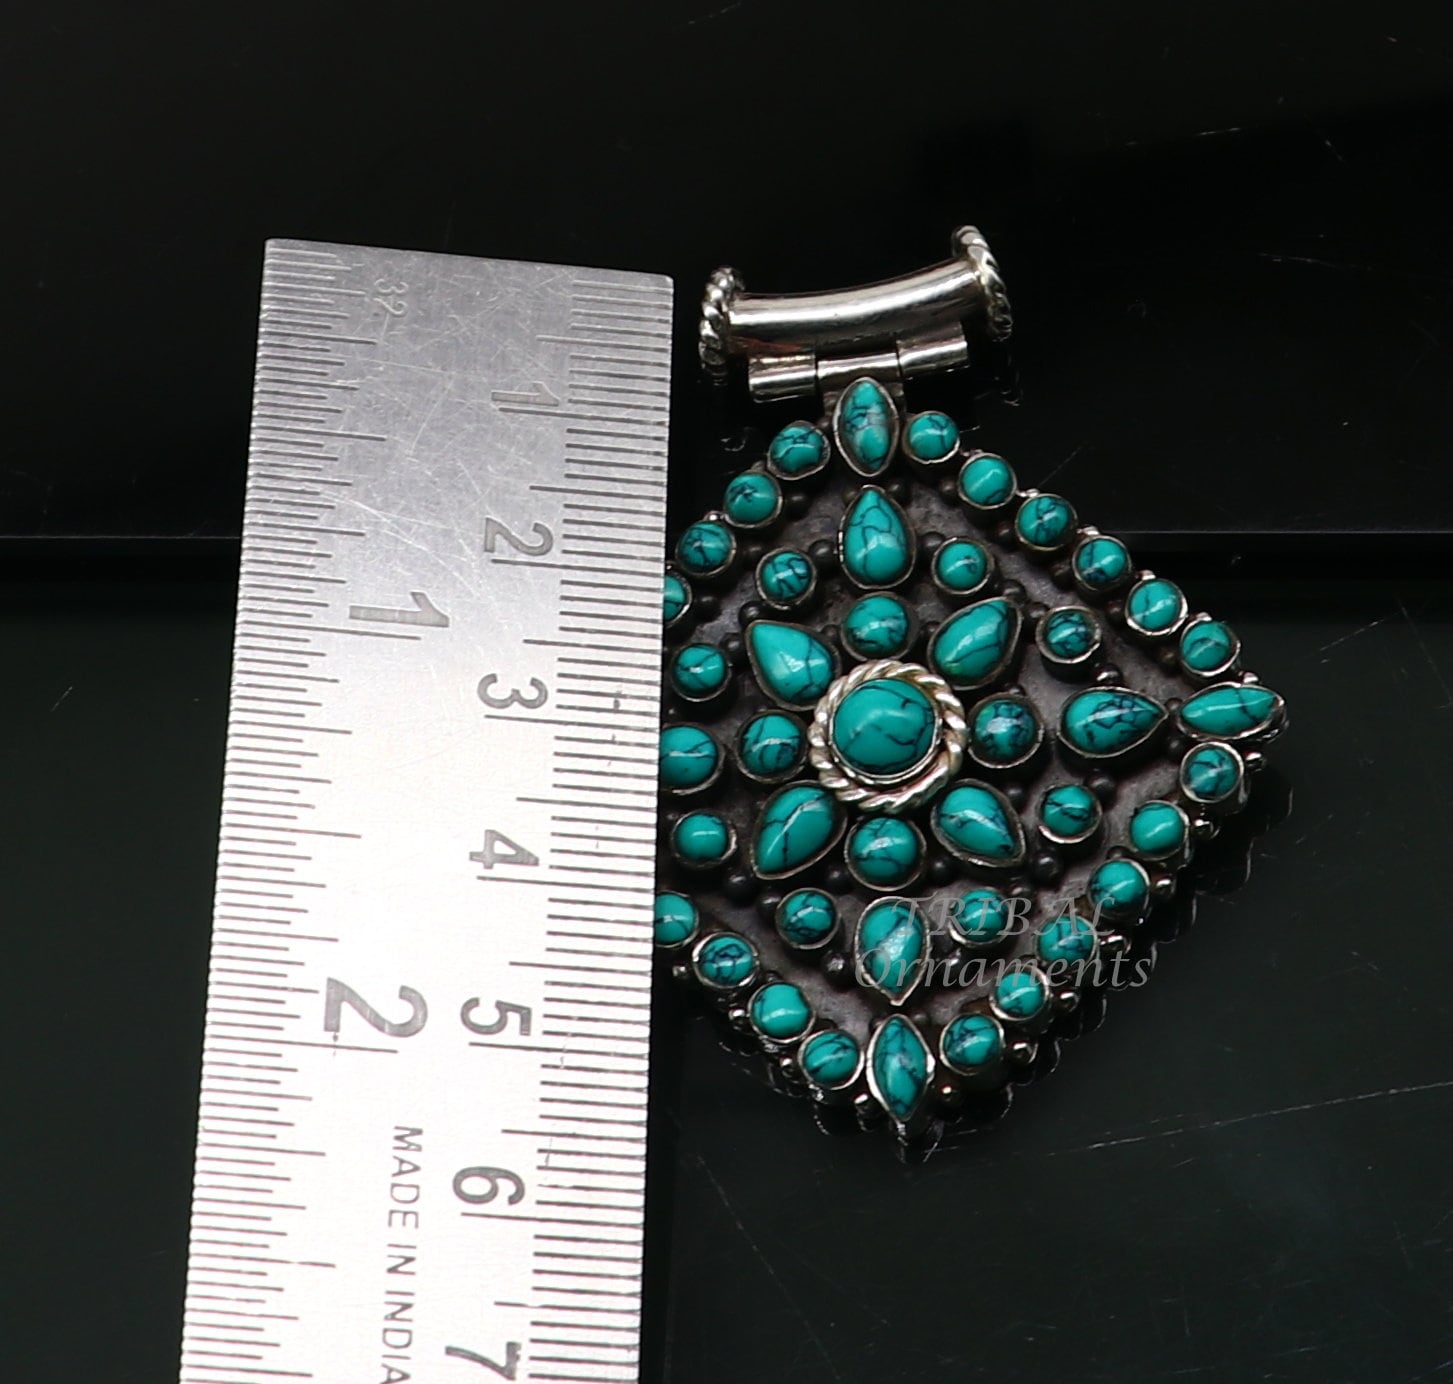 Vintage antique design handmade 925 sterling silver fabulous turquoise stone pendant wedding women's ethnic tribal jewelry nsp527 - TRIBAL ORNAMENTS